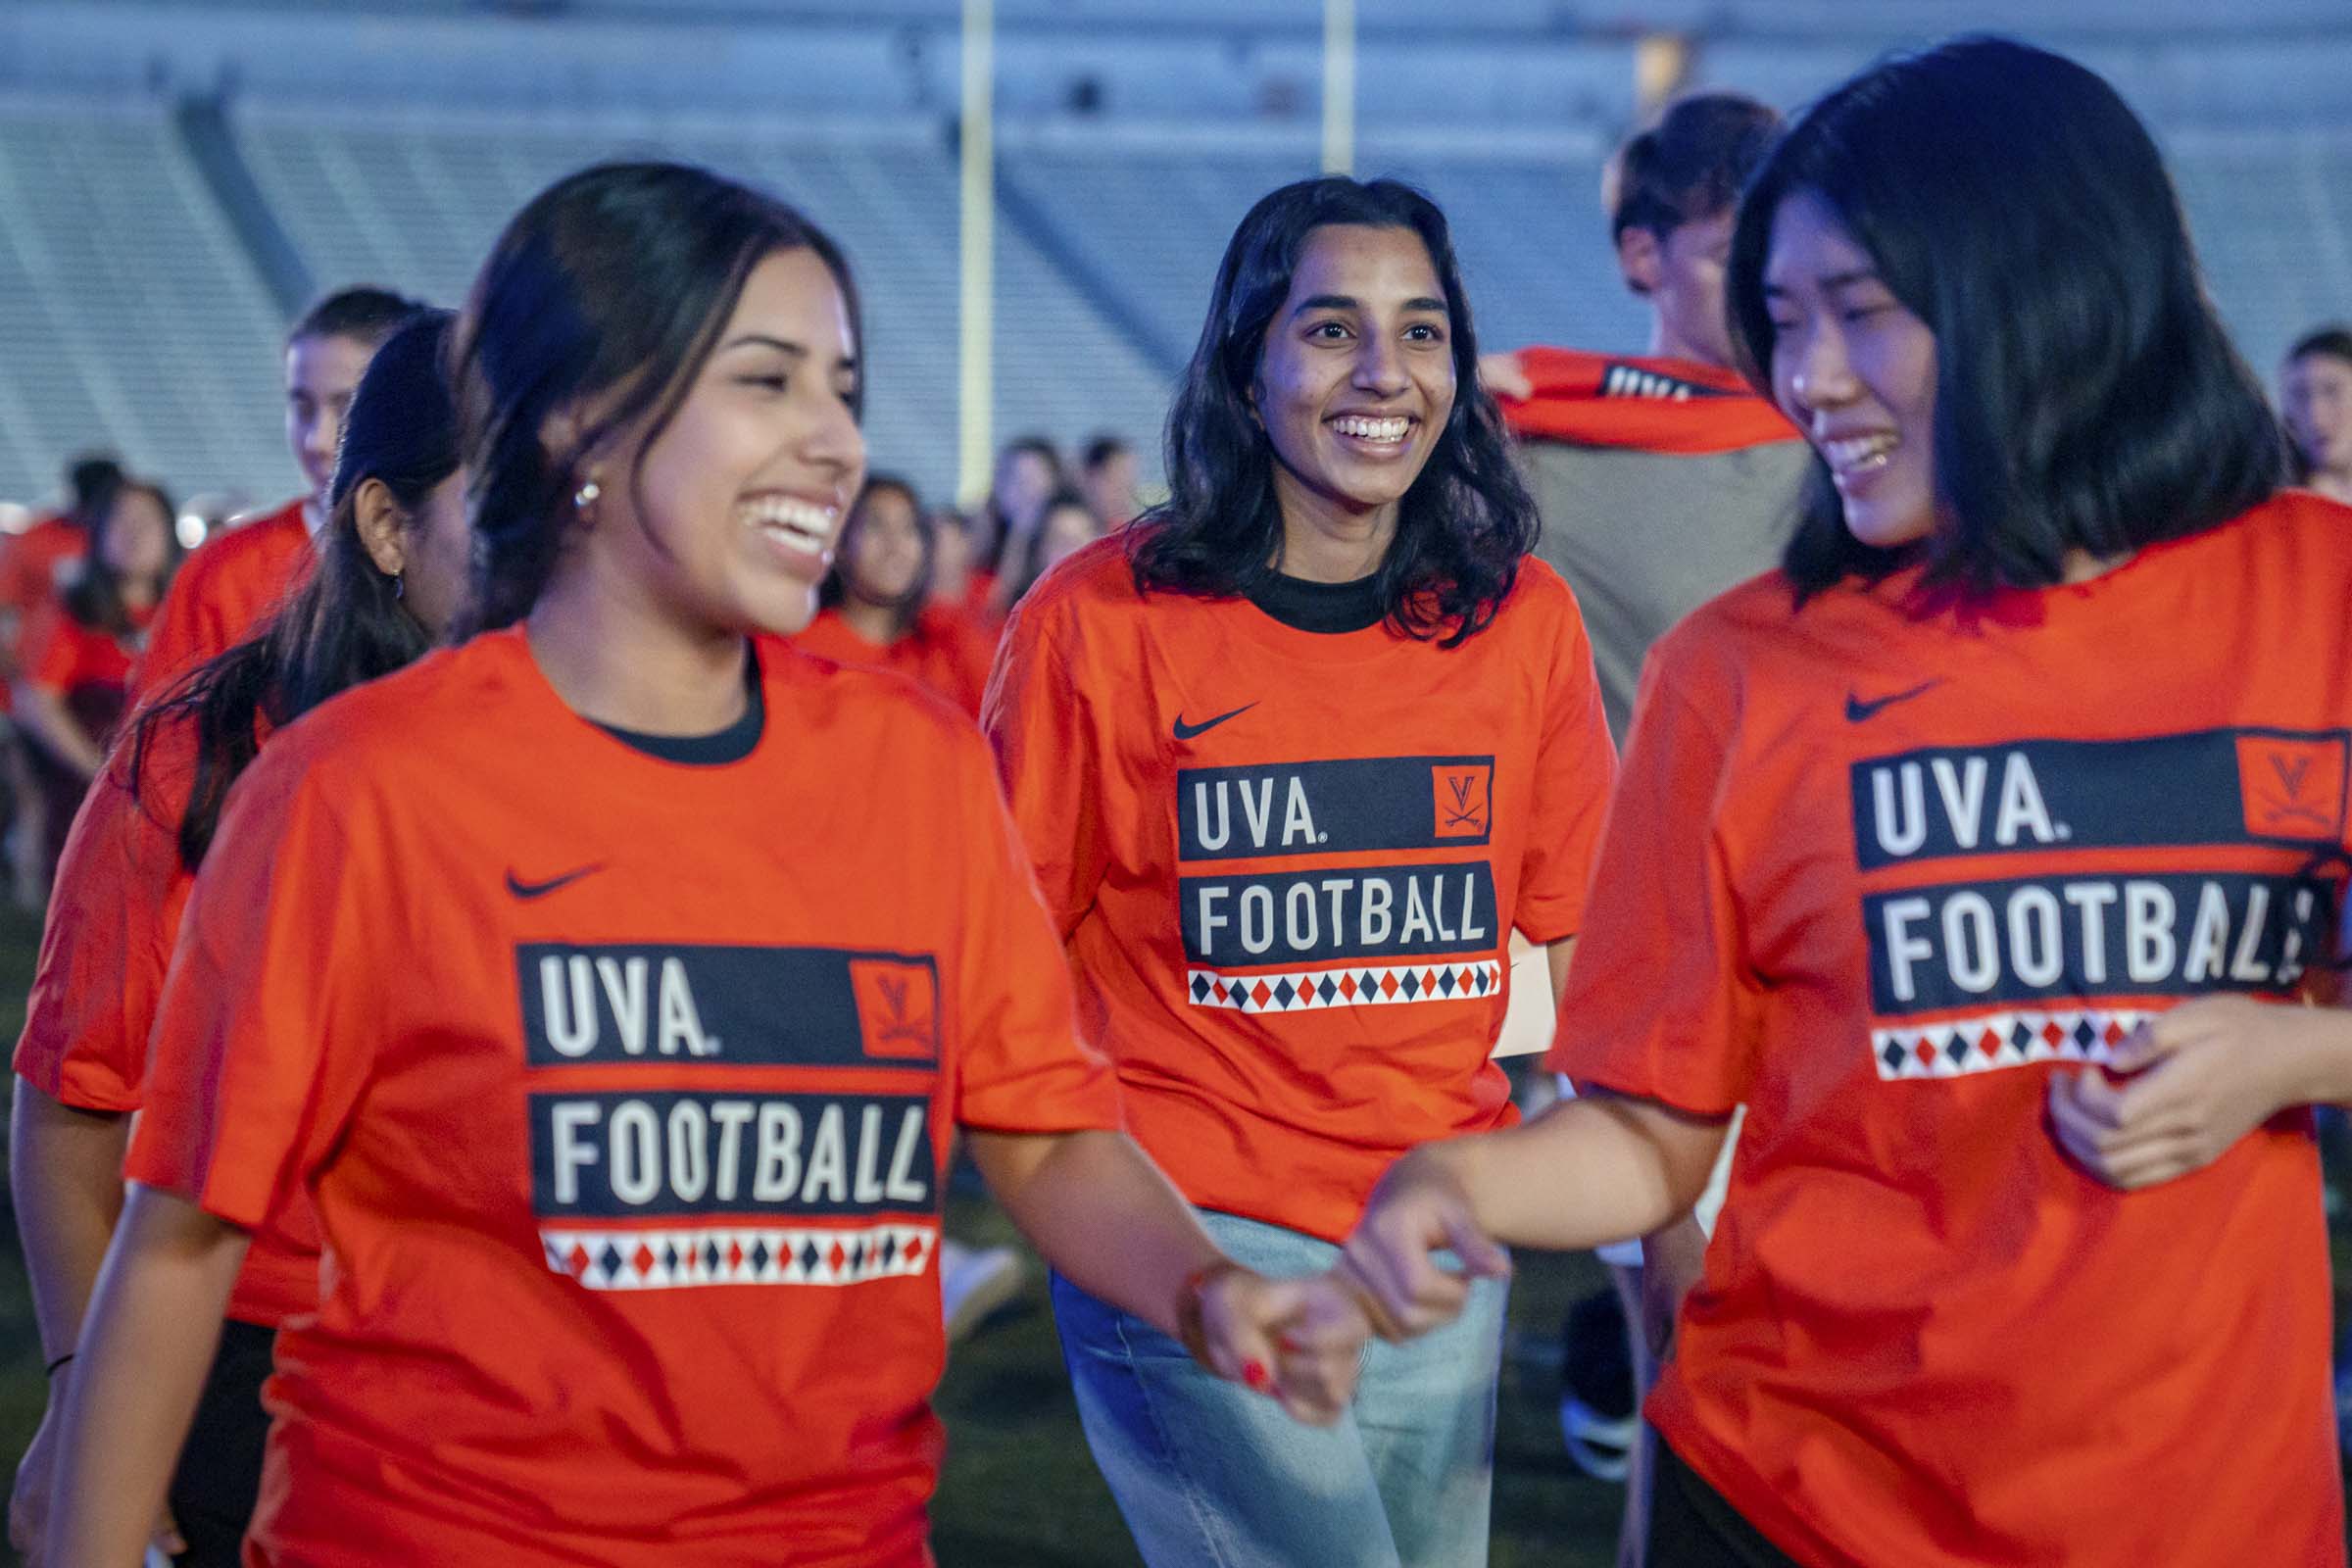 Students smiling with UVA Football shirts on